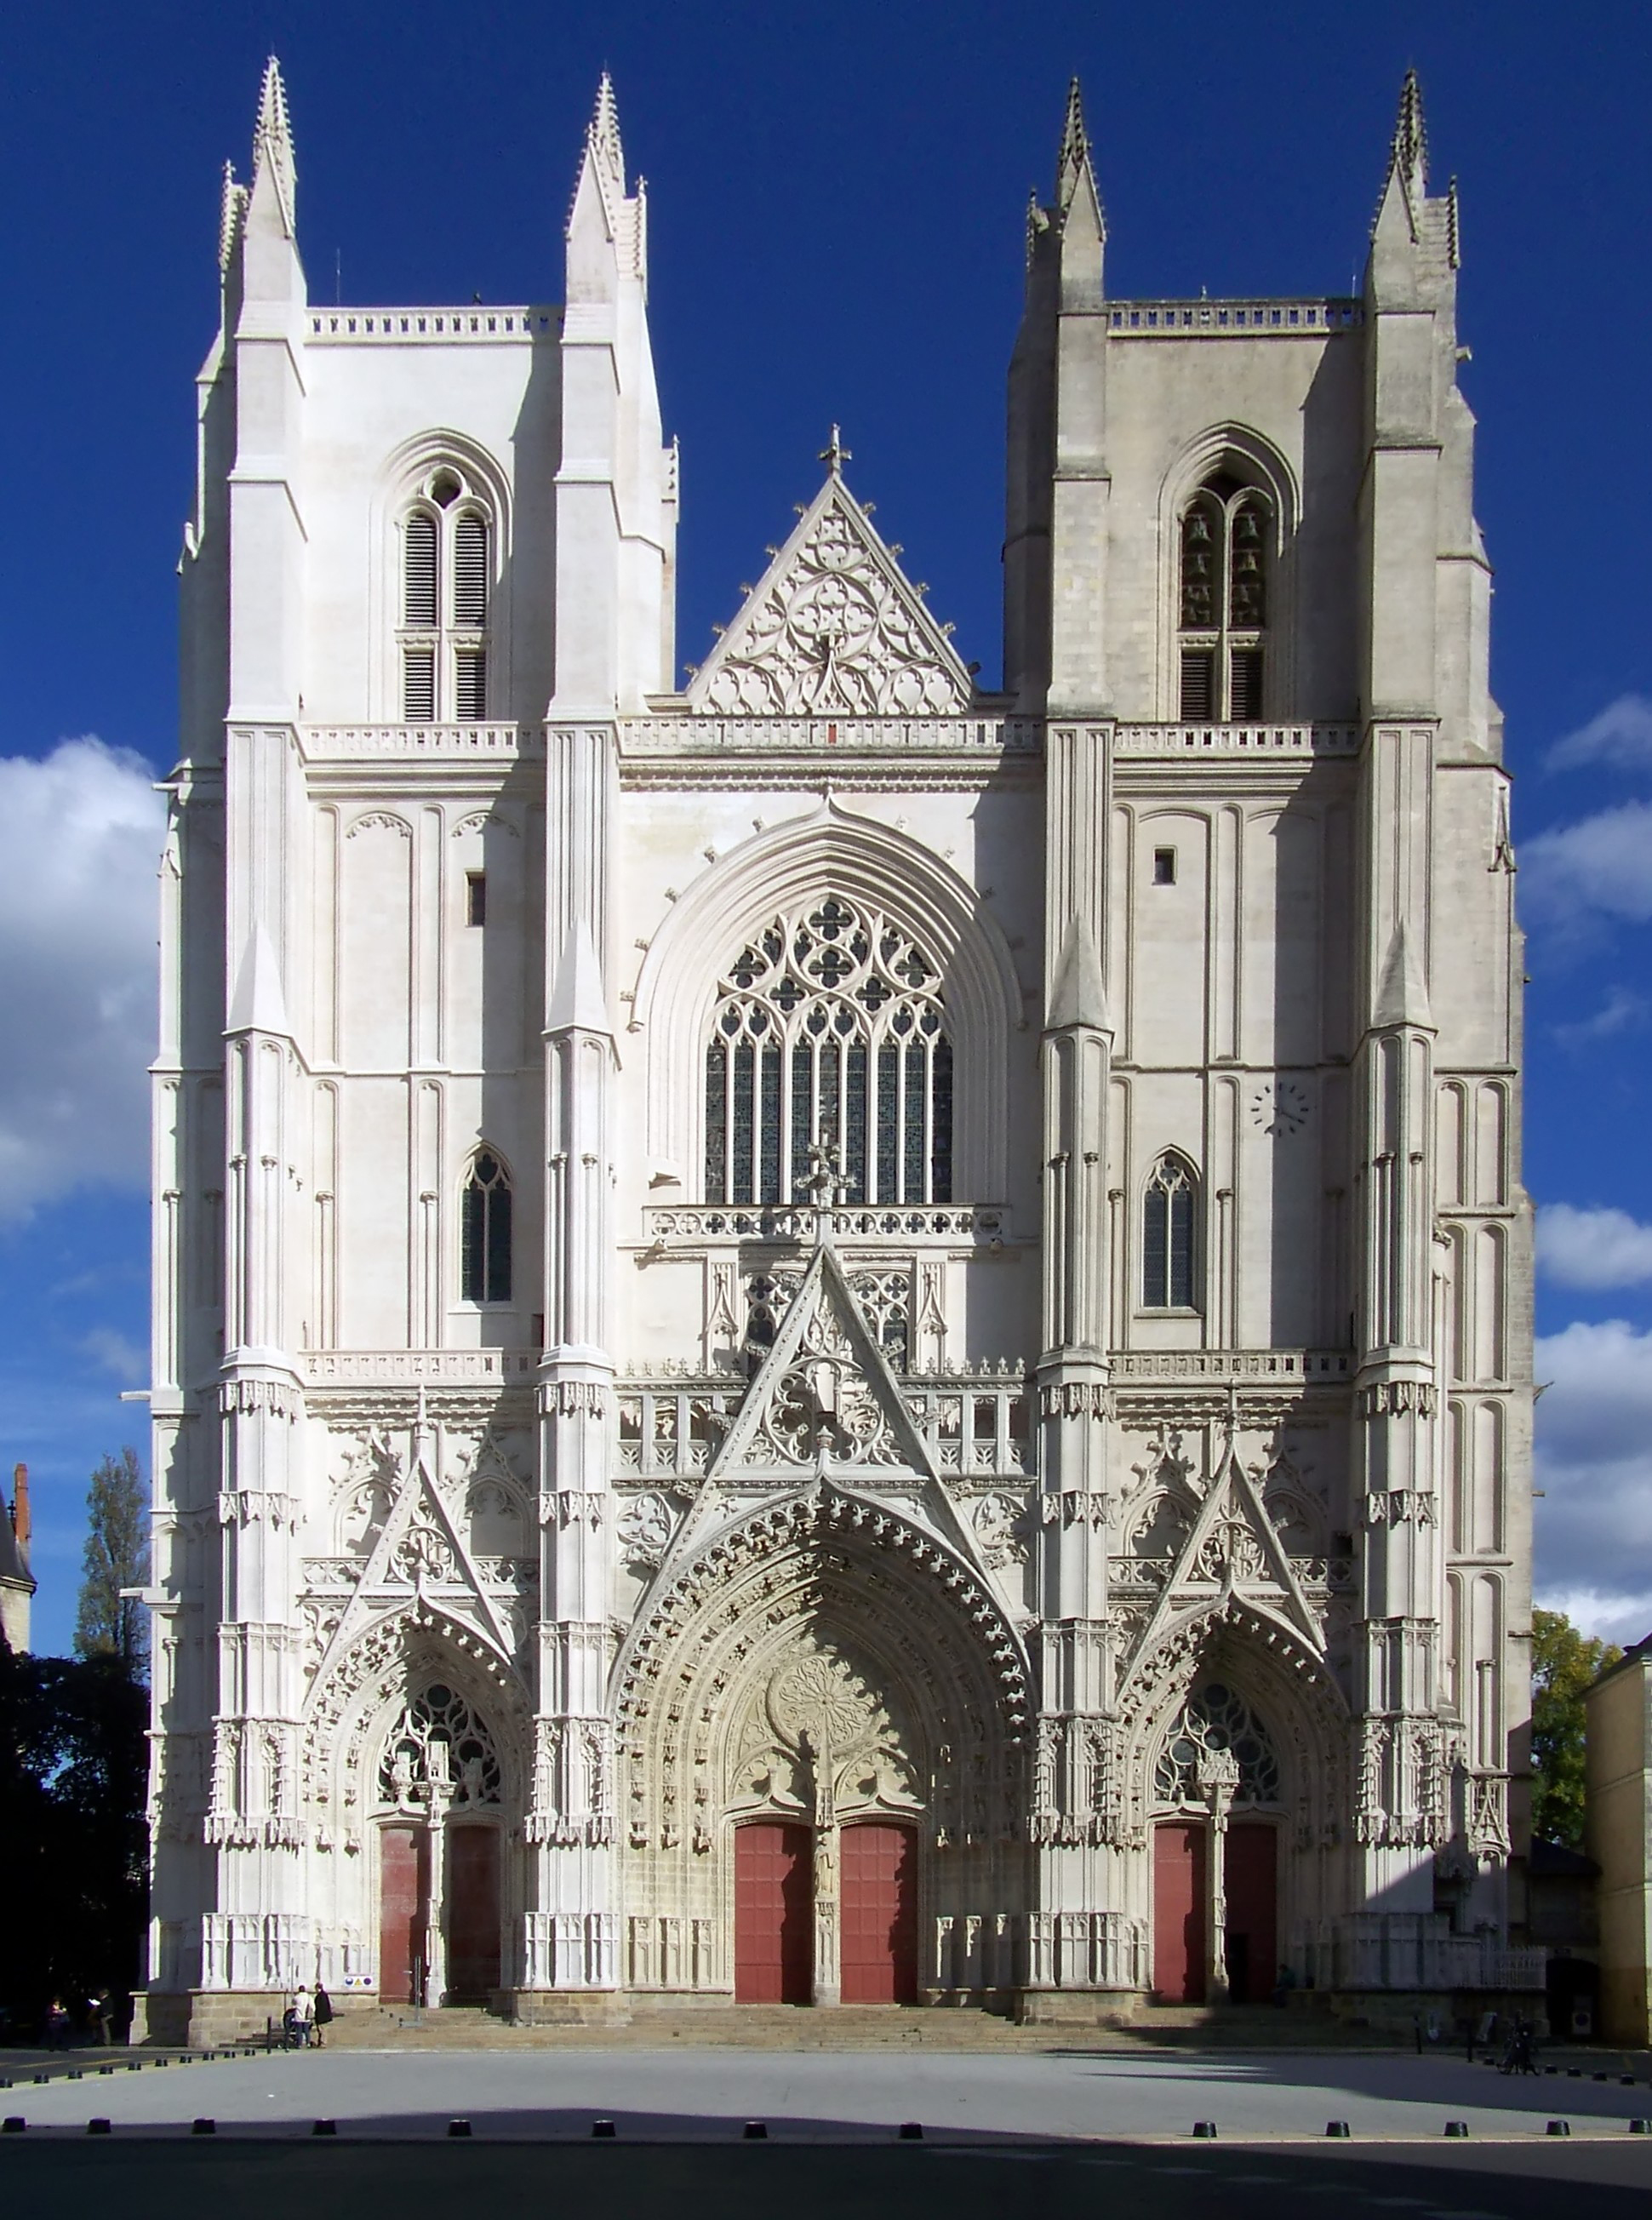 35 engaging photos of Nantes Cathedral, France : Places : BOOMSbeat